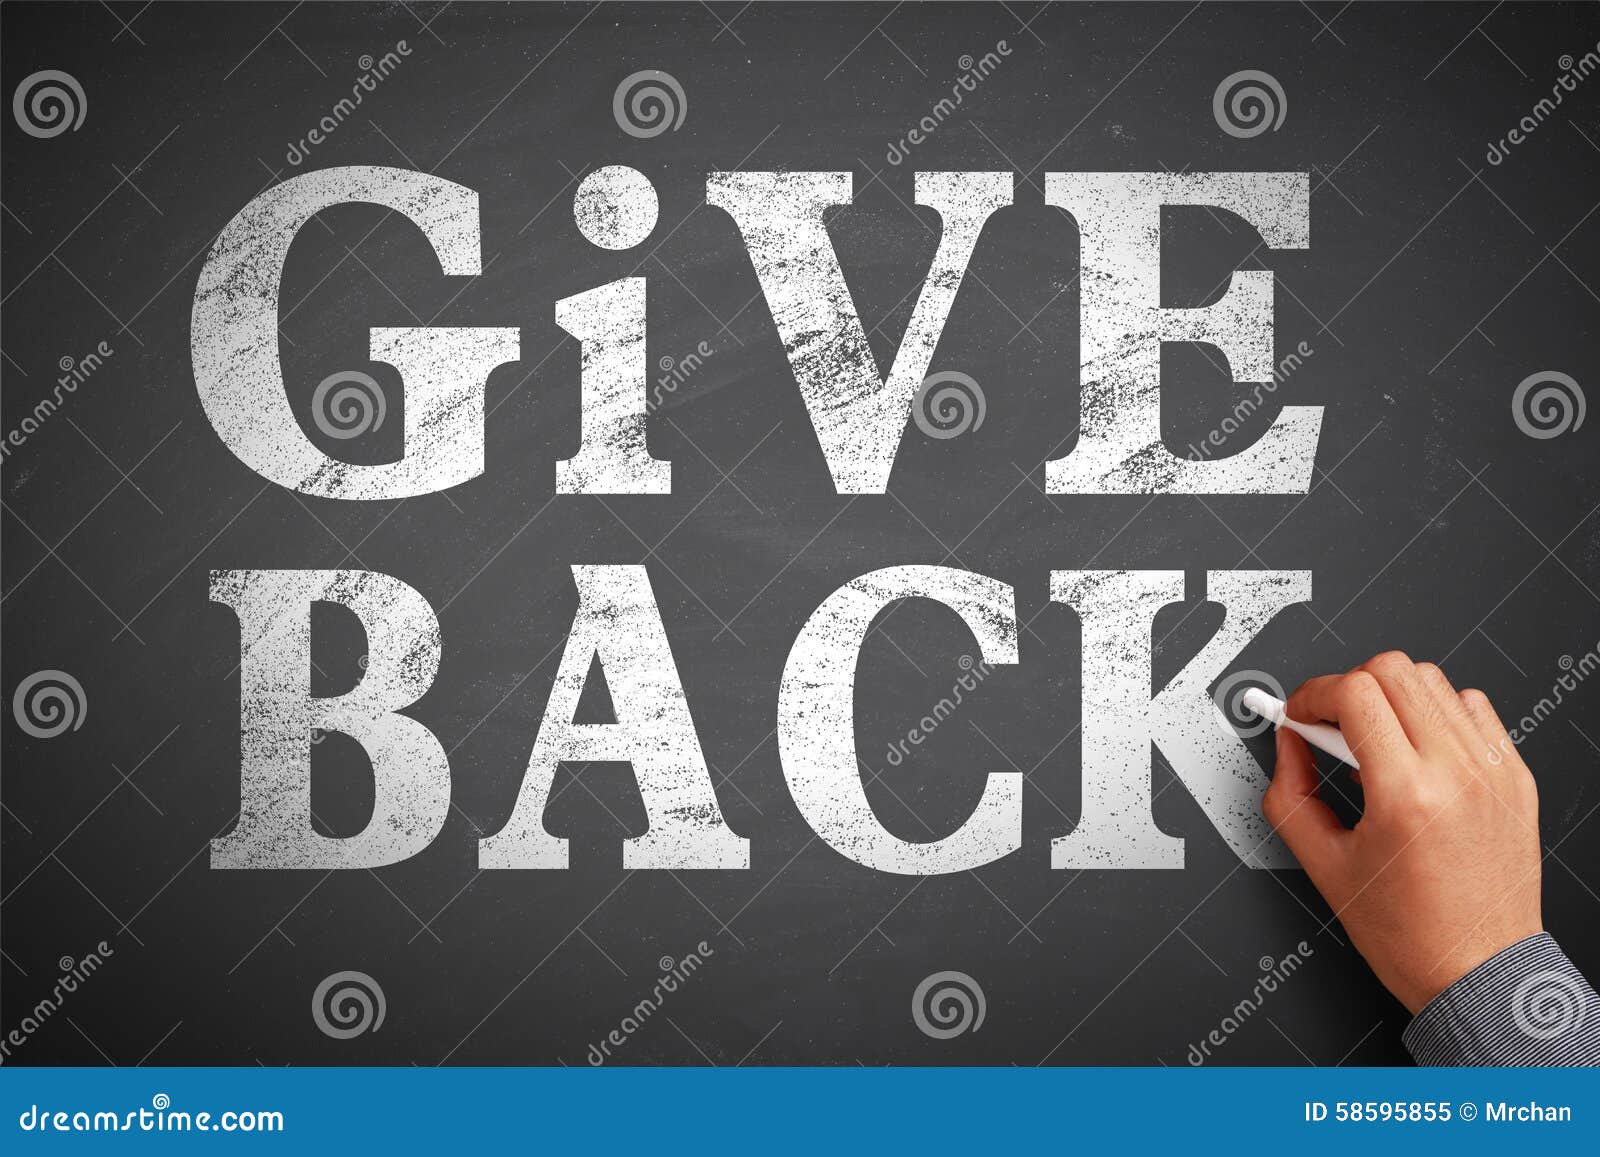 Take words back. Give back картинка. Give back.